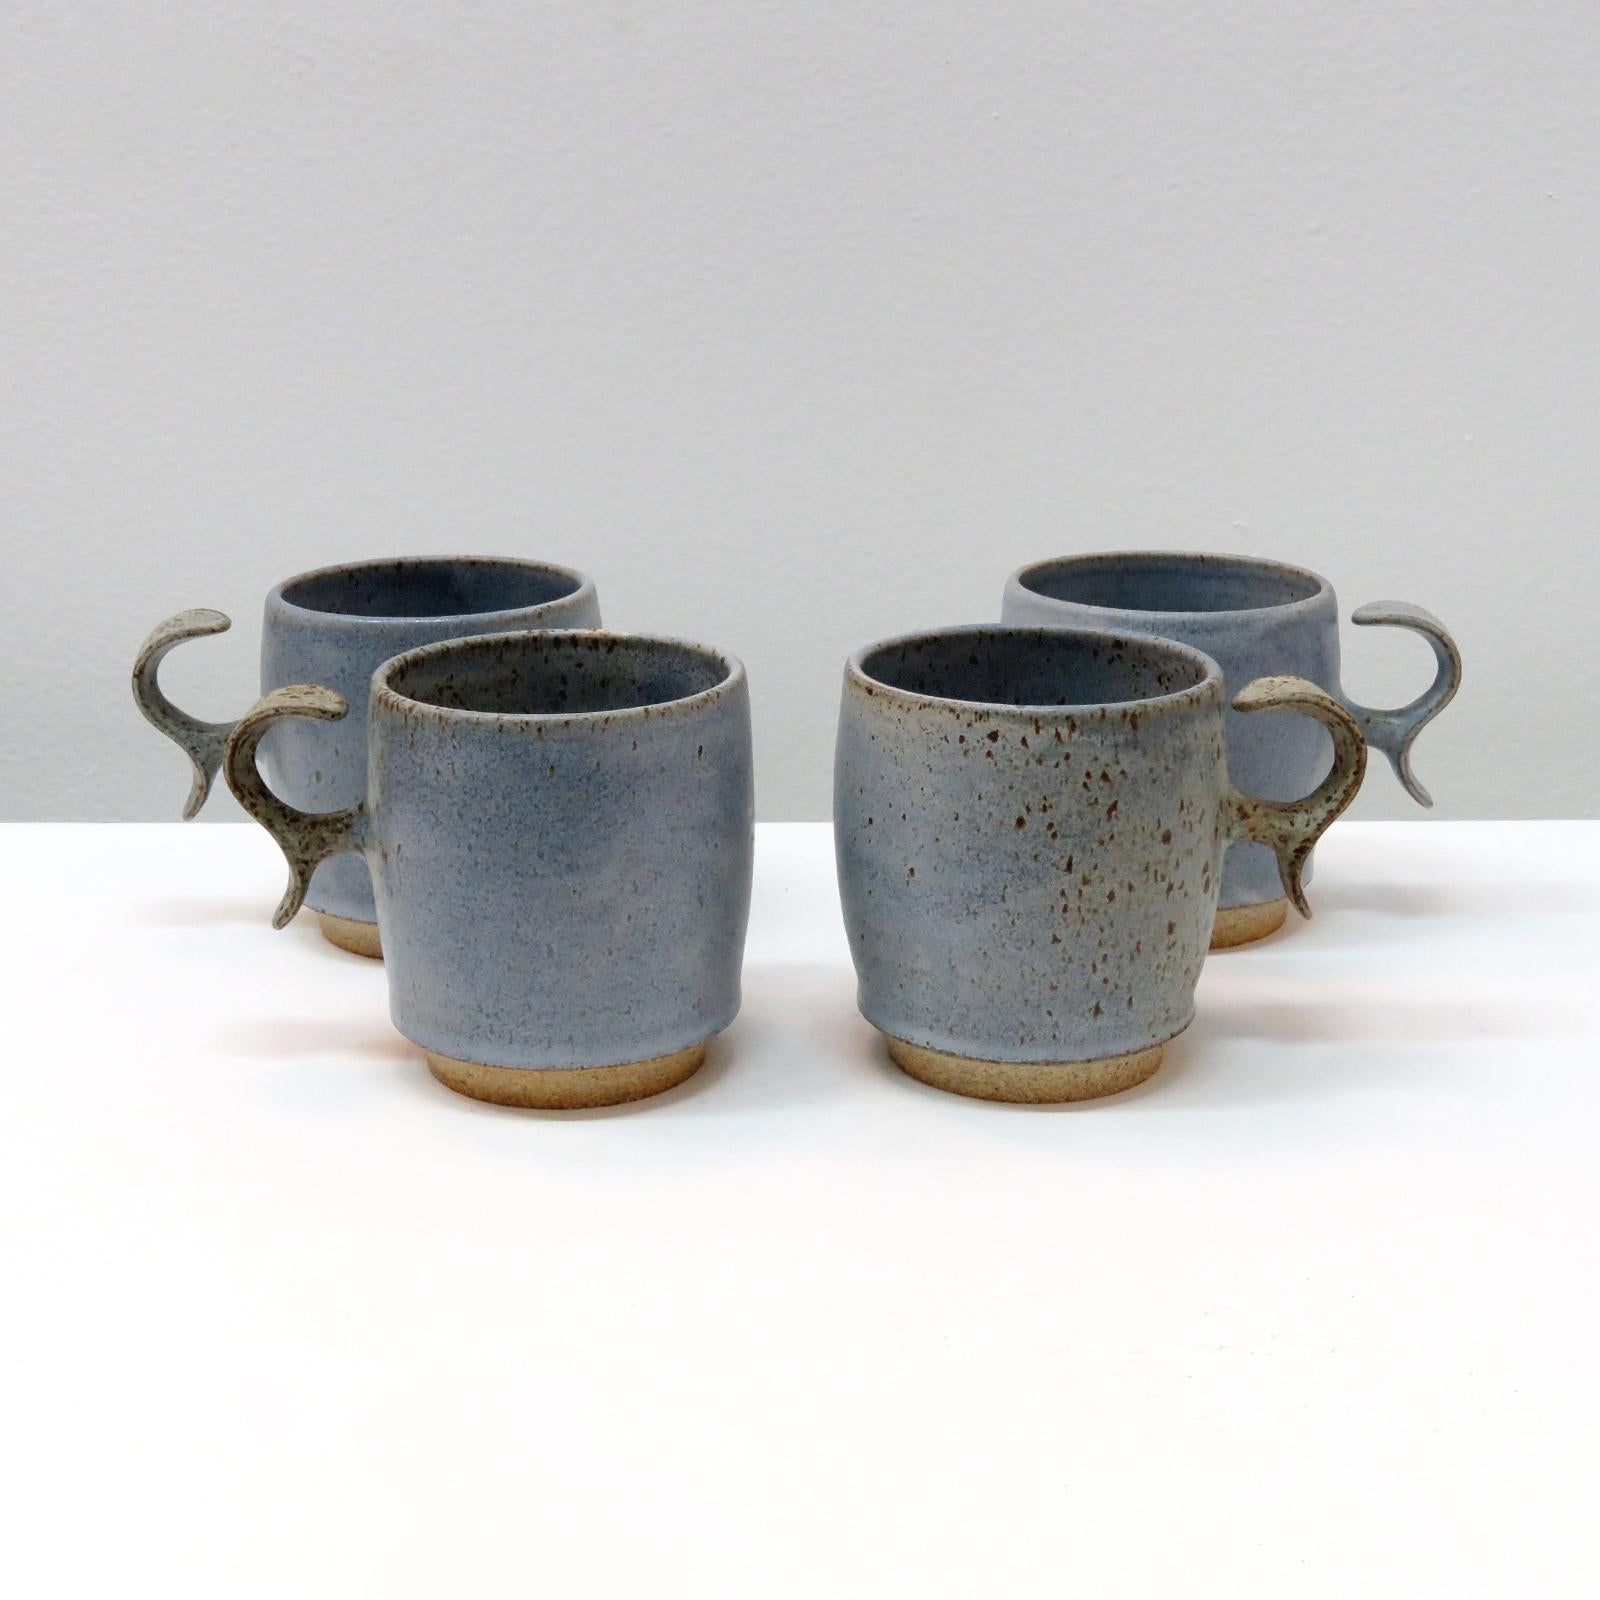 wonderful 'S-Handle' mugs, handcrafted by Los Angeles based ceramicist Jed Farlow for Farlow Design. High fired stoneware with matte 'blue jeans' glaze. Designed with a human-centered approach in mind, these one-of-a-kind mugs are experimenting with